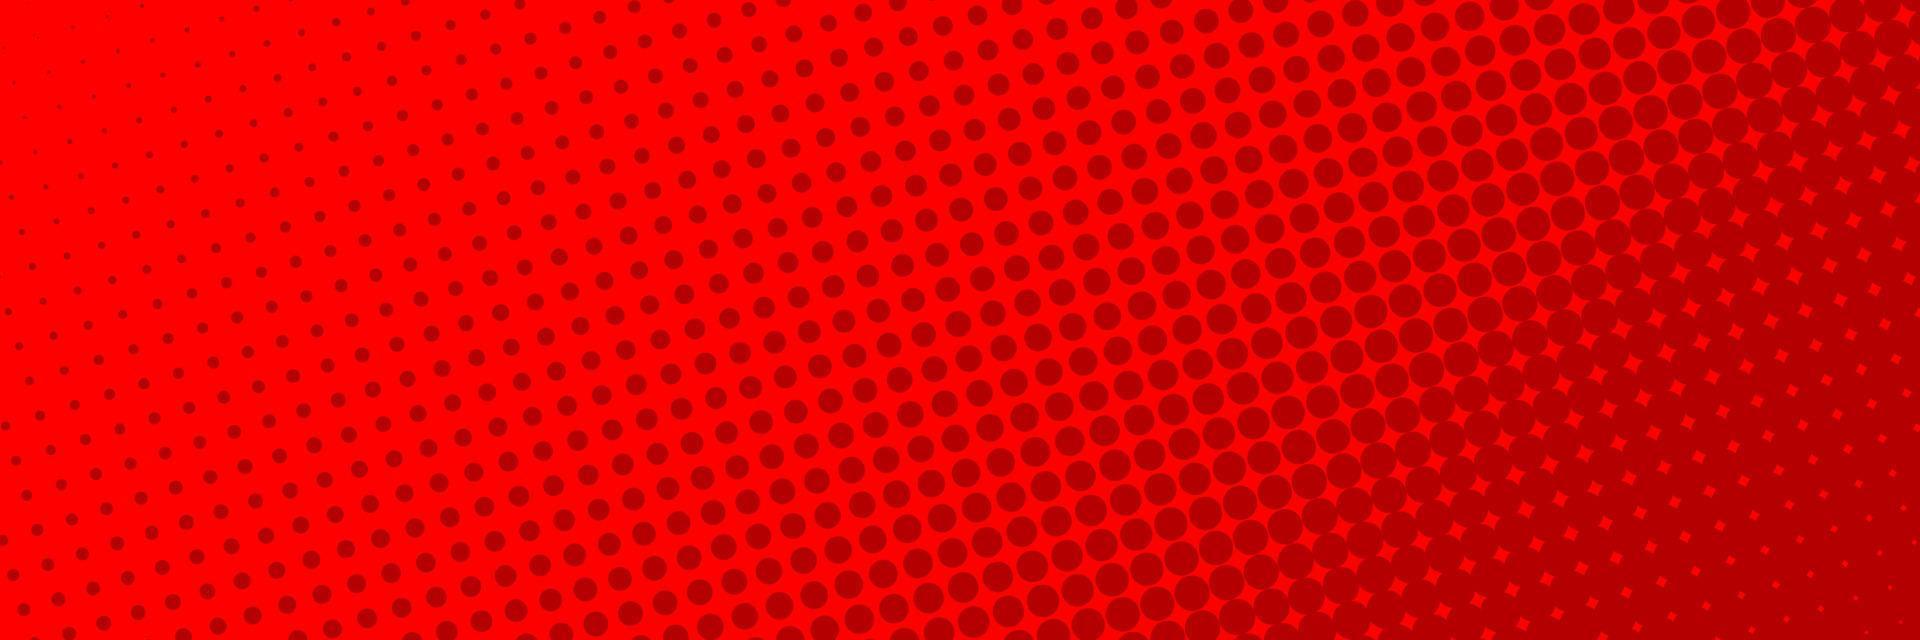 Comic halftone dots background Red color. Comic background. Halftone dots background. Vector illustration